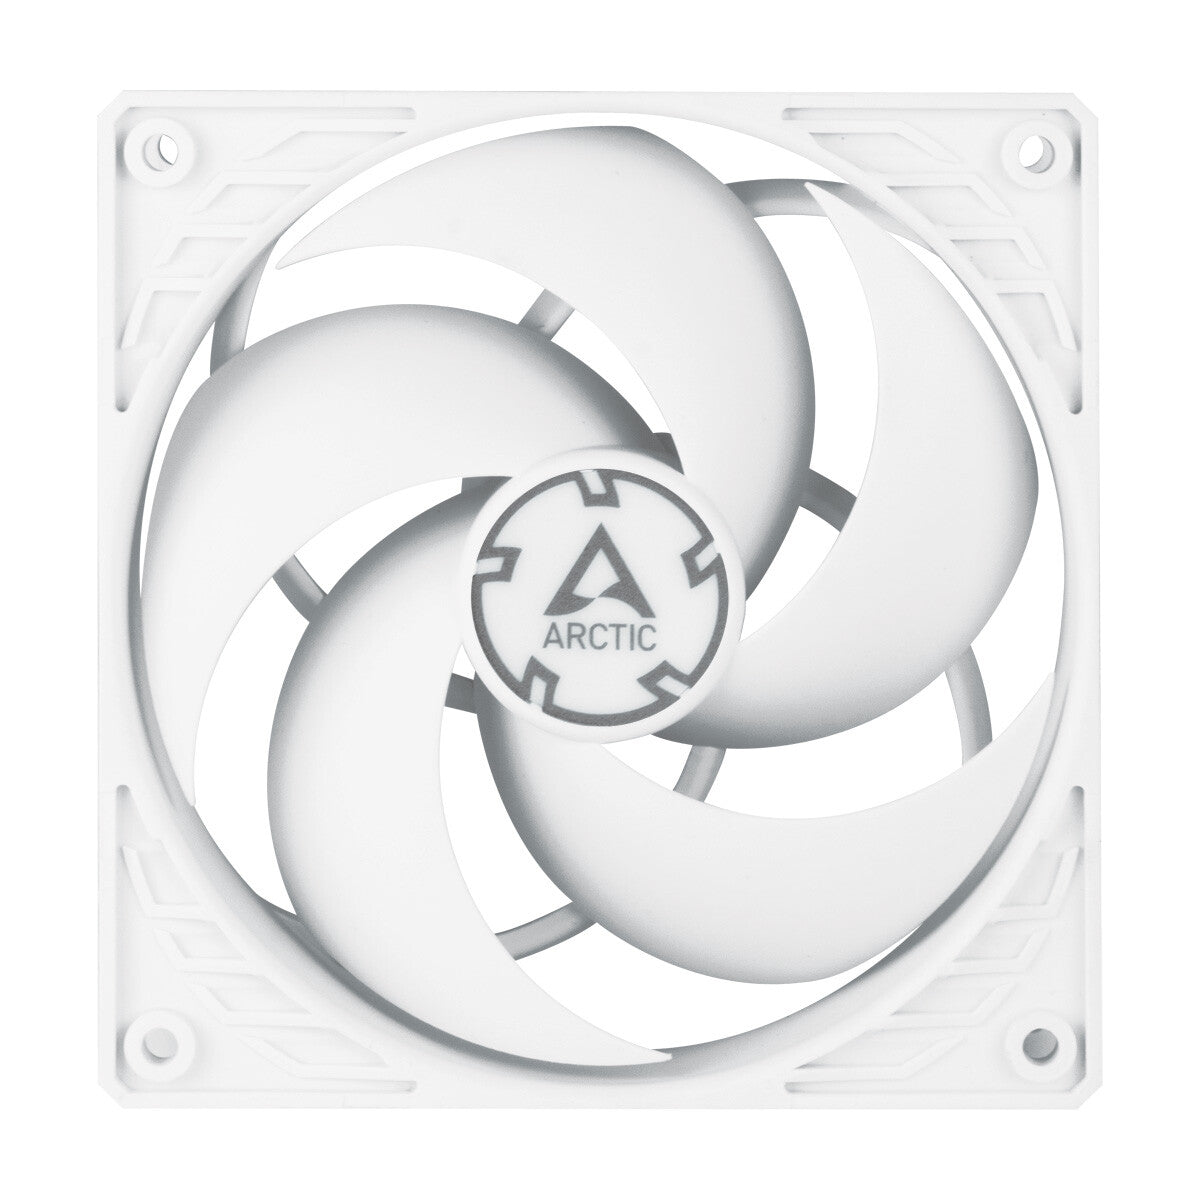 ARCTIC P12 PWM PST - Computer Case Fan in White - 120mm